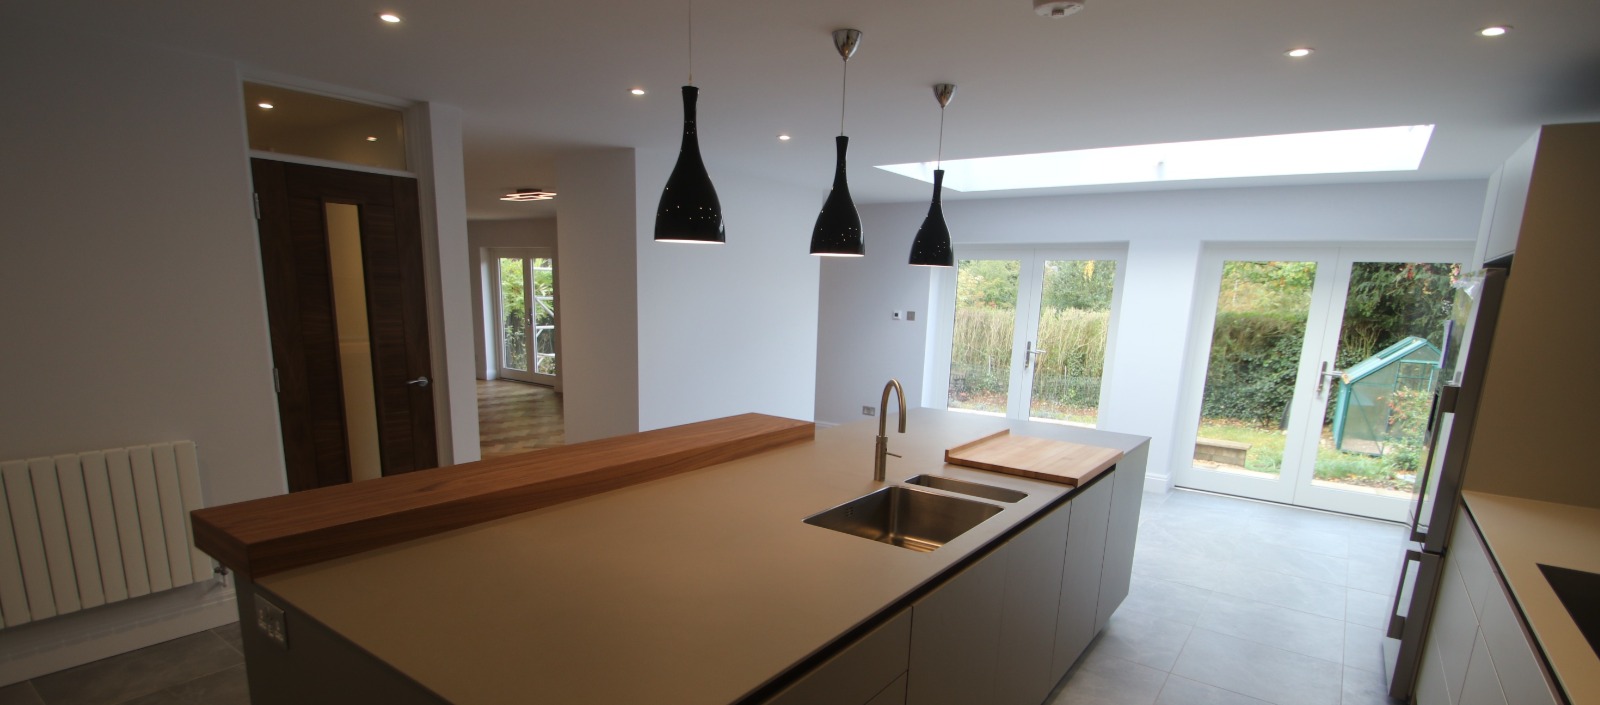 Complete refurbishment of a detached house in Marston